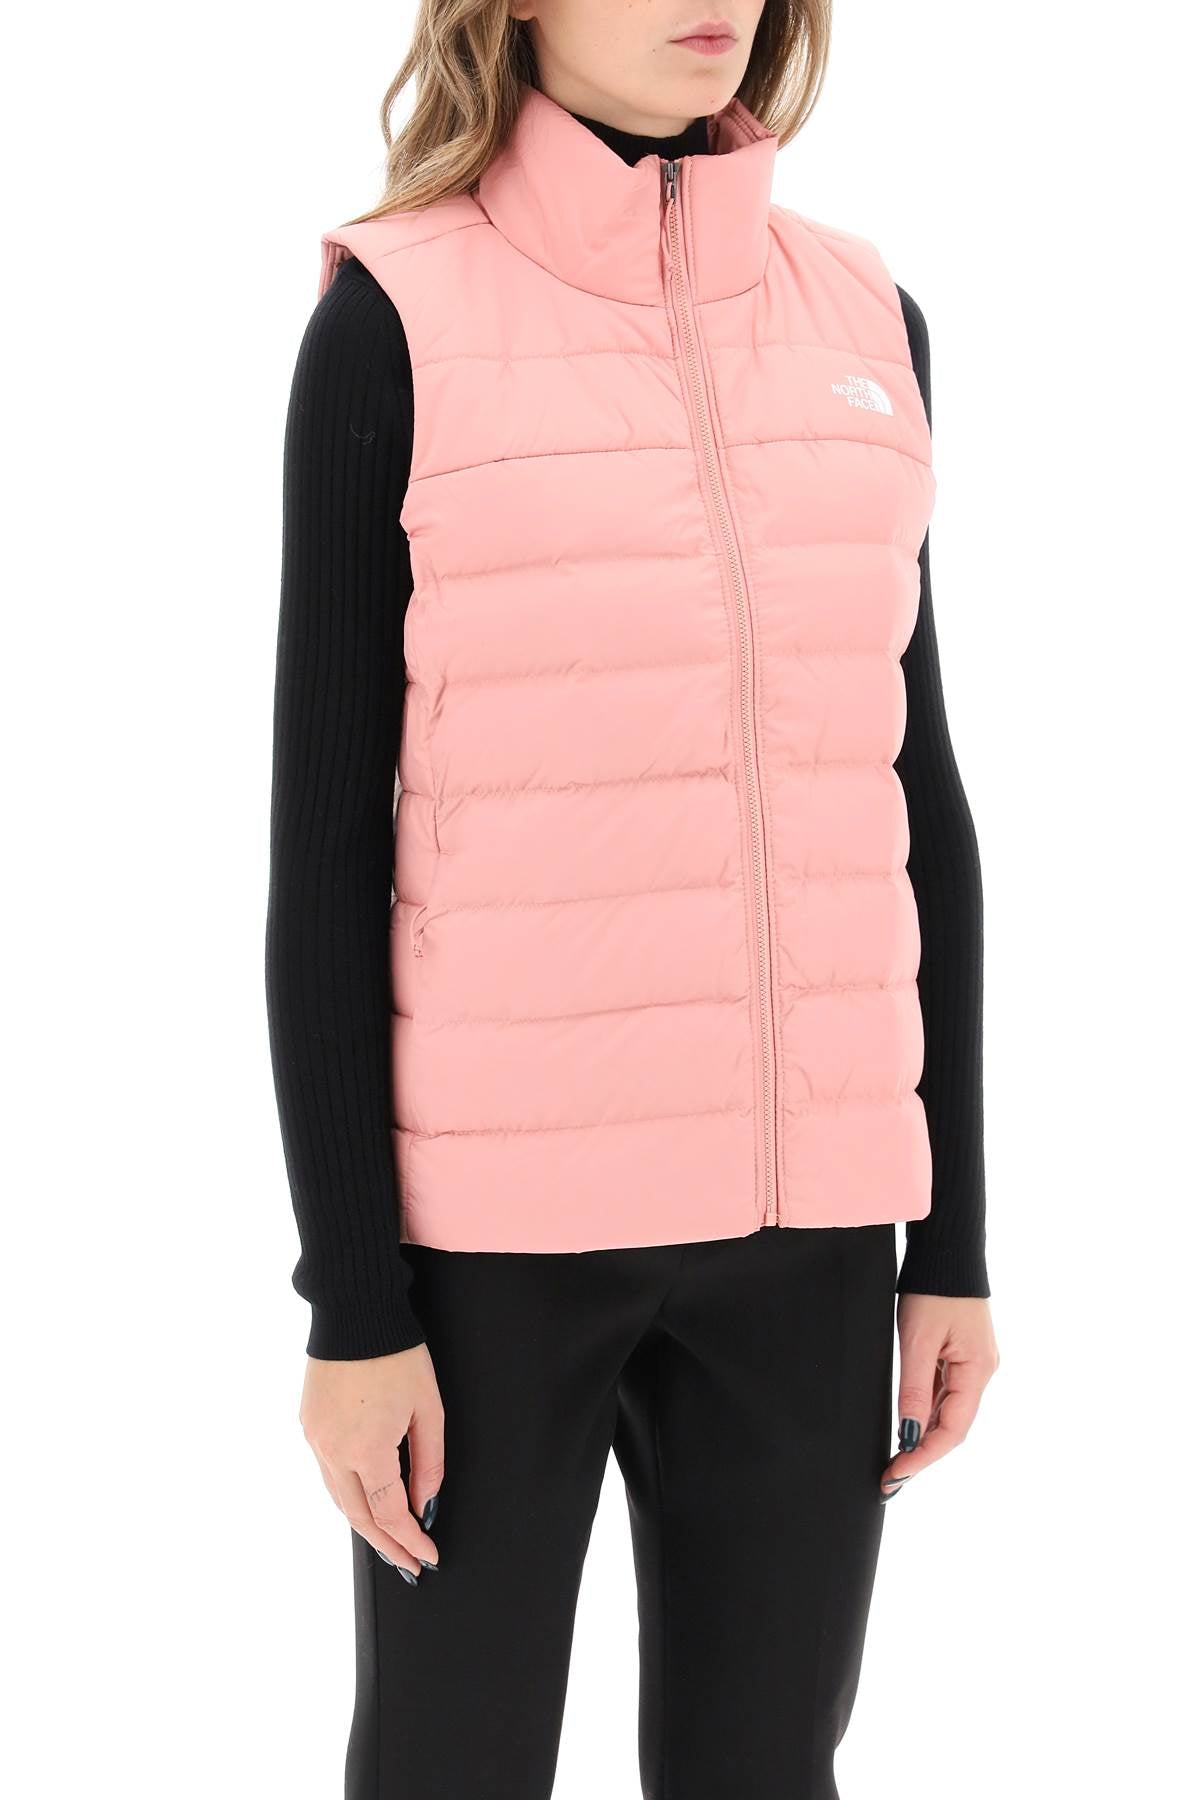 The north face akoncagua lightweight puffer vest-1